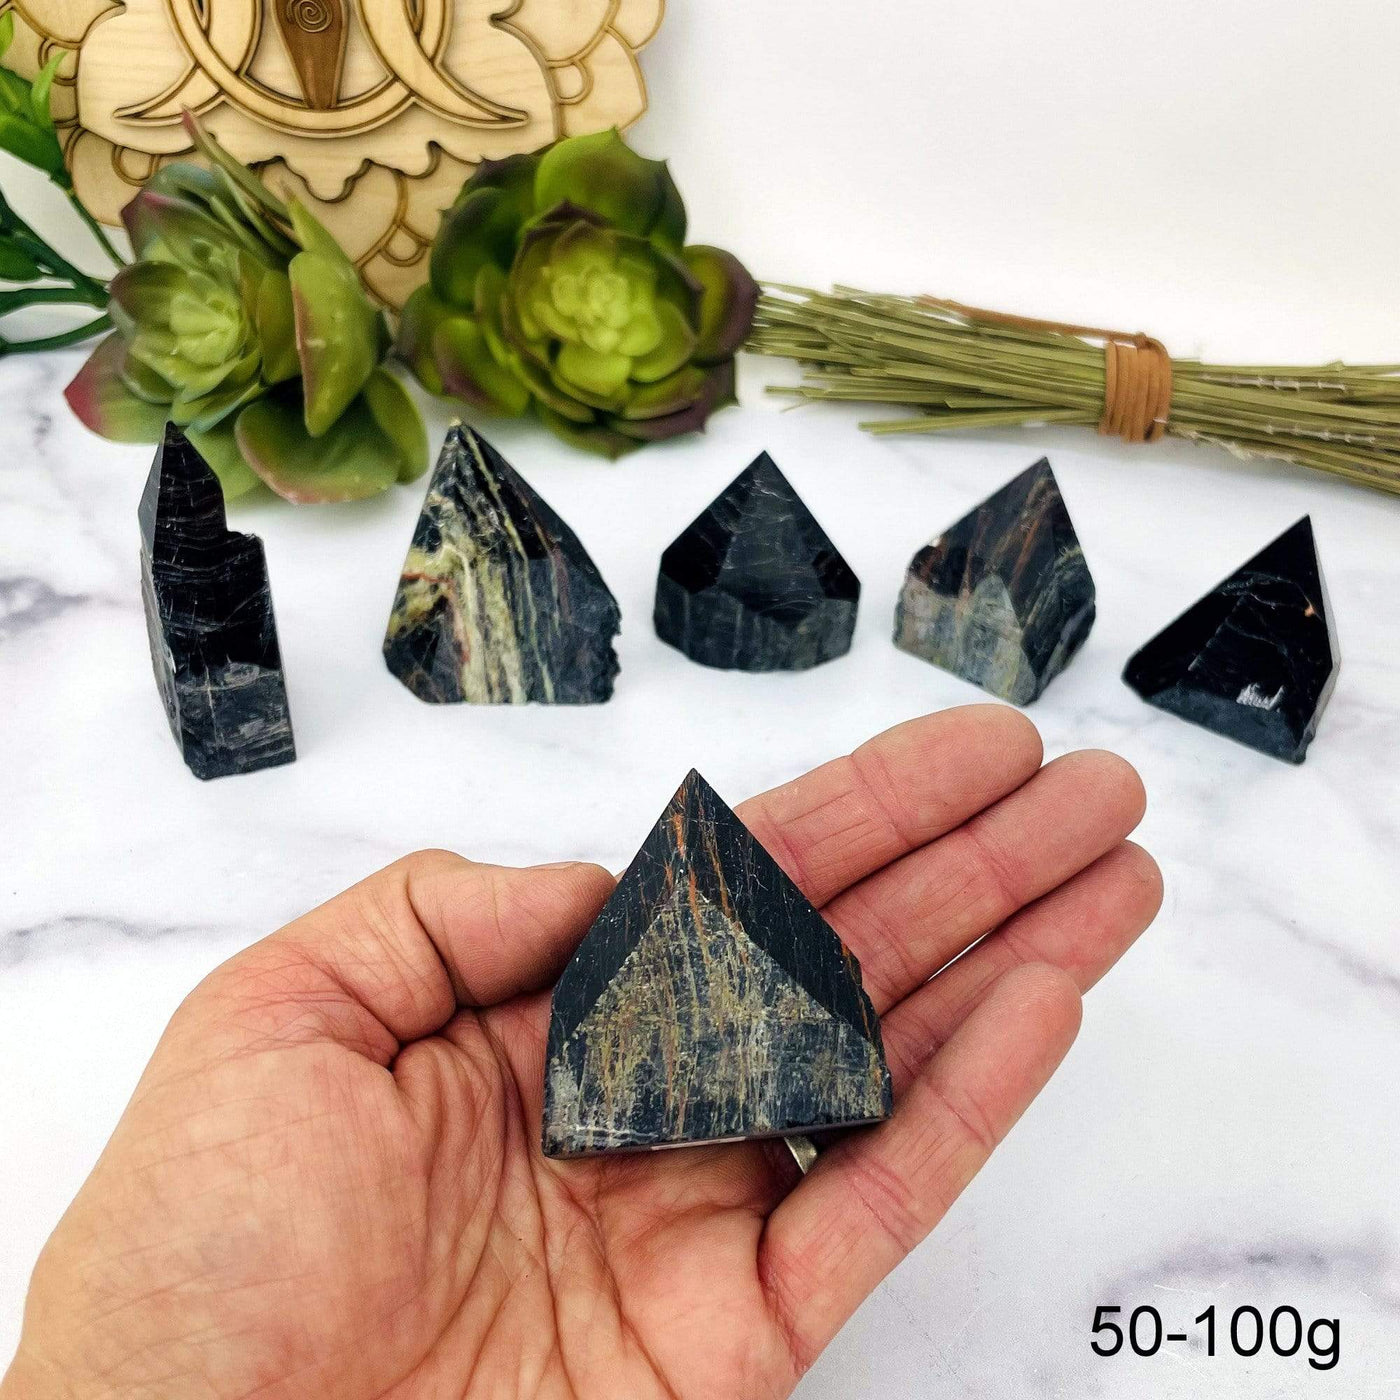 Black Tourmaline with Red Hematite Veins Semi Polished Points weight in 50-100g in hand for size reference